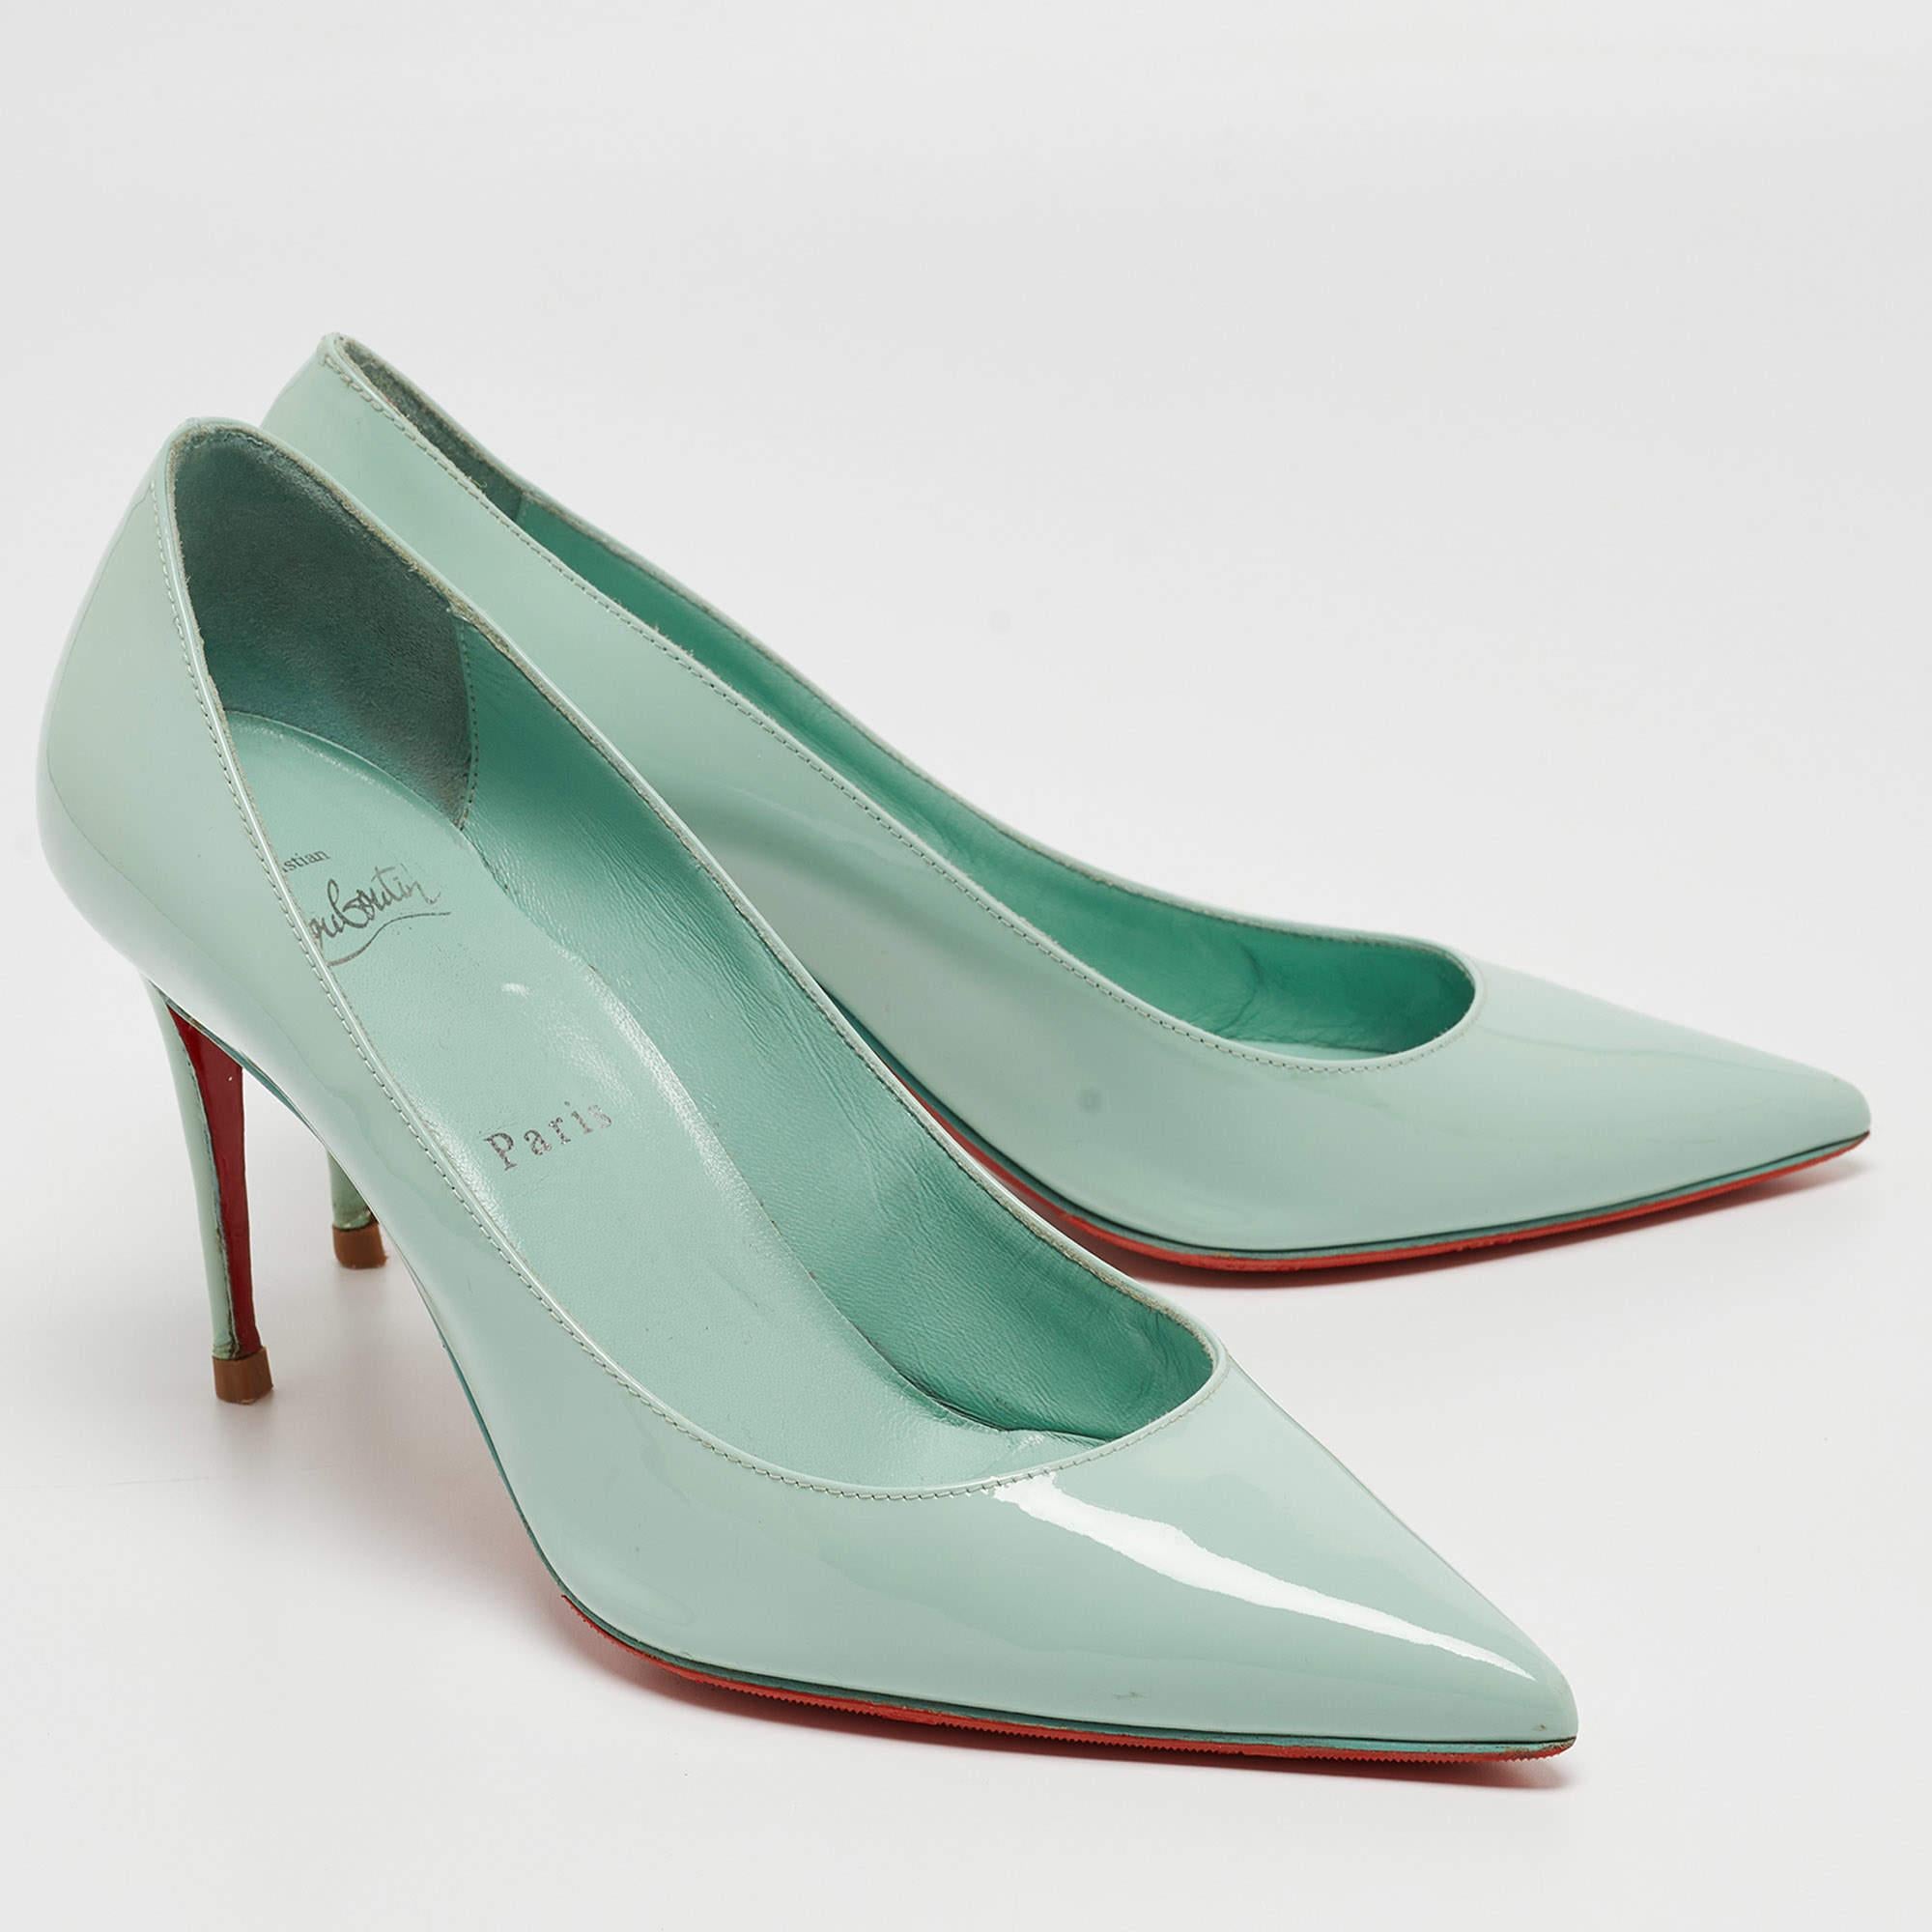 Women's Christian Louboutin Light Green Patent Leather Pigalle Pointed Toe Pumps Size 38